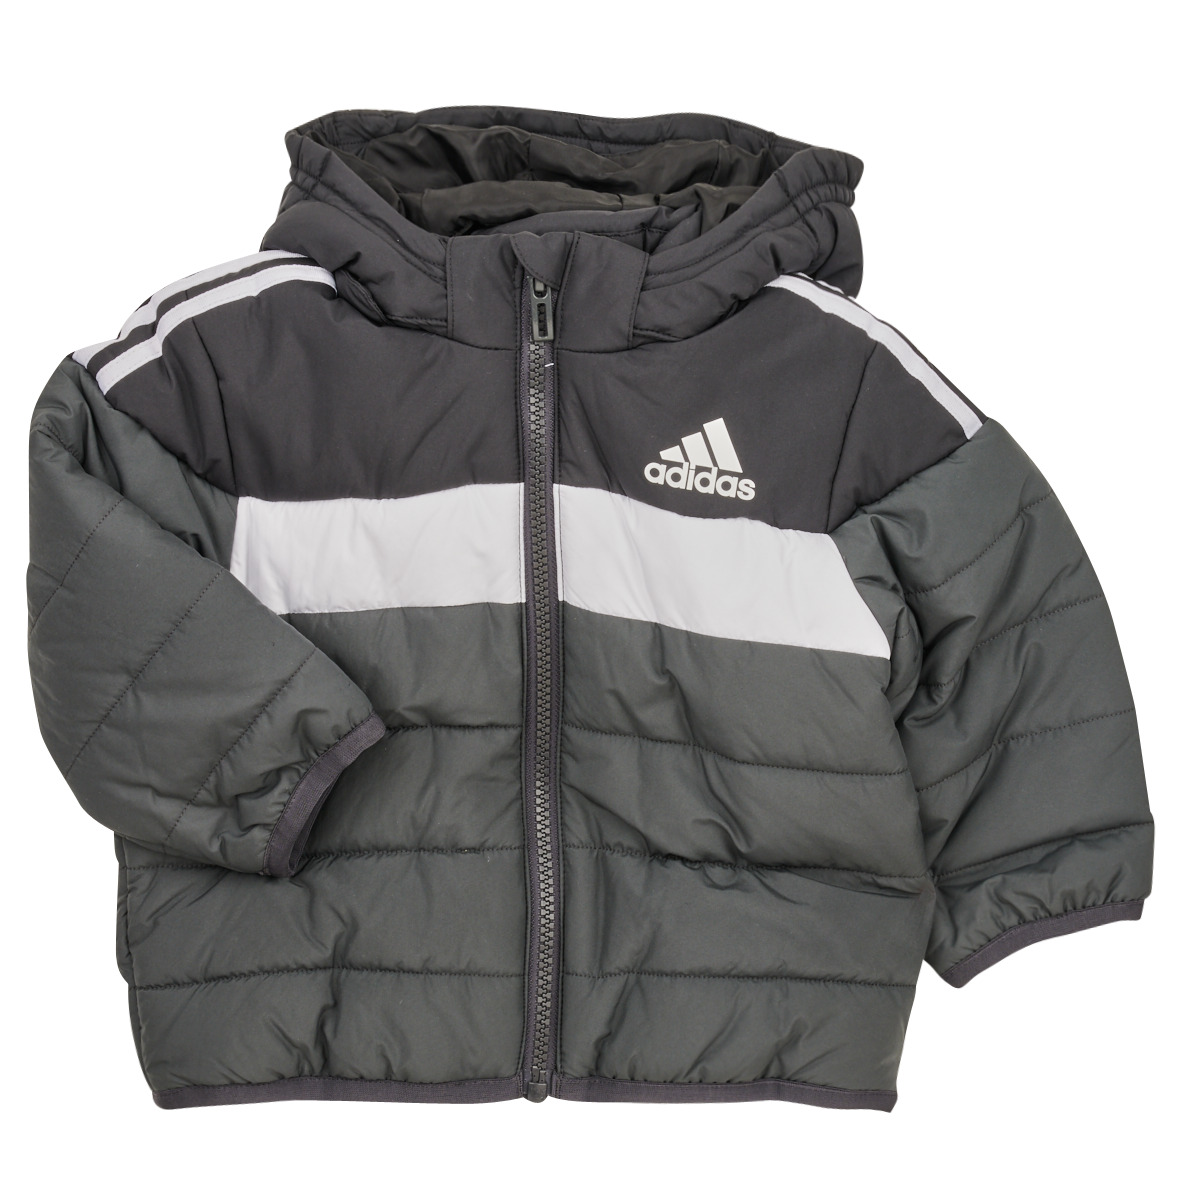 Adidas Sportswear IN F PAD JKT Black - Free delivery | Spartoo NET ! -  Clothing Duffel coats Child